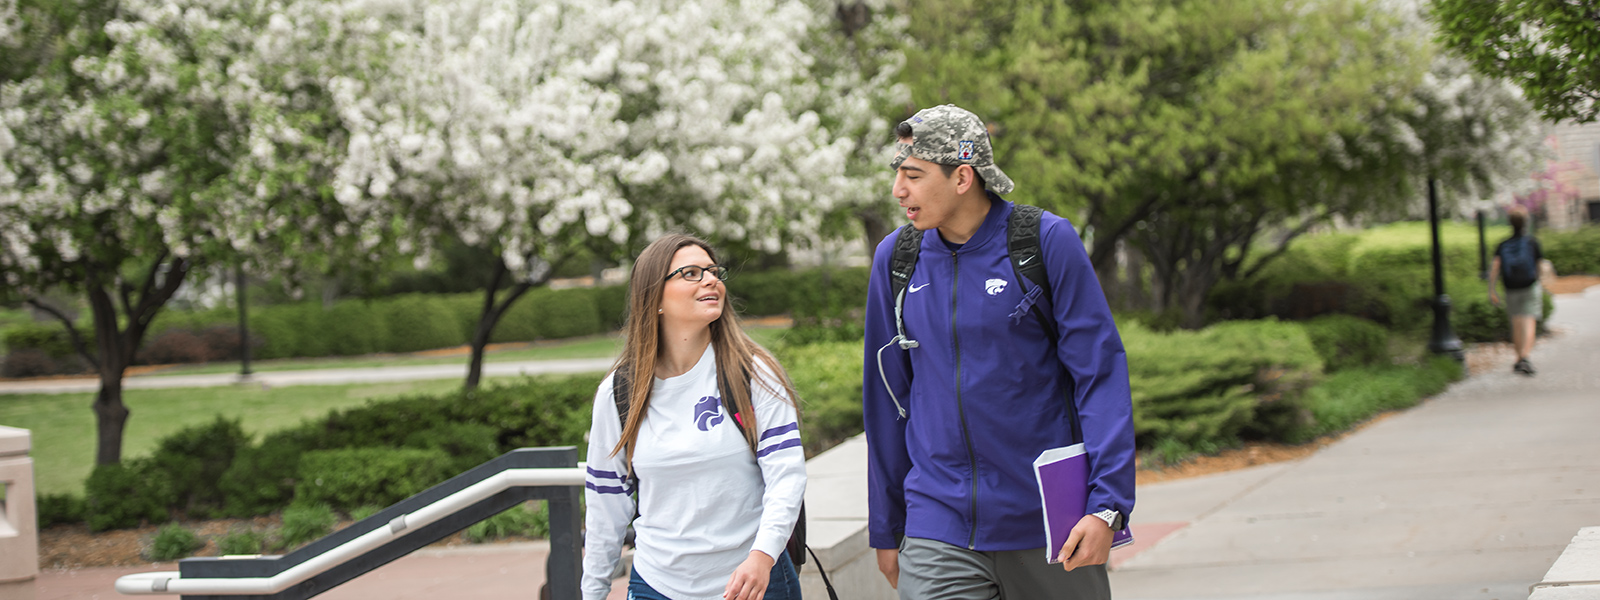 Students walking on K-State campus